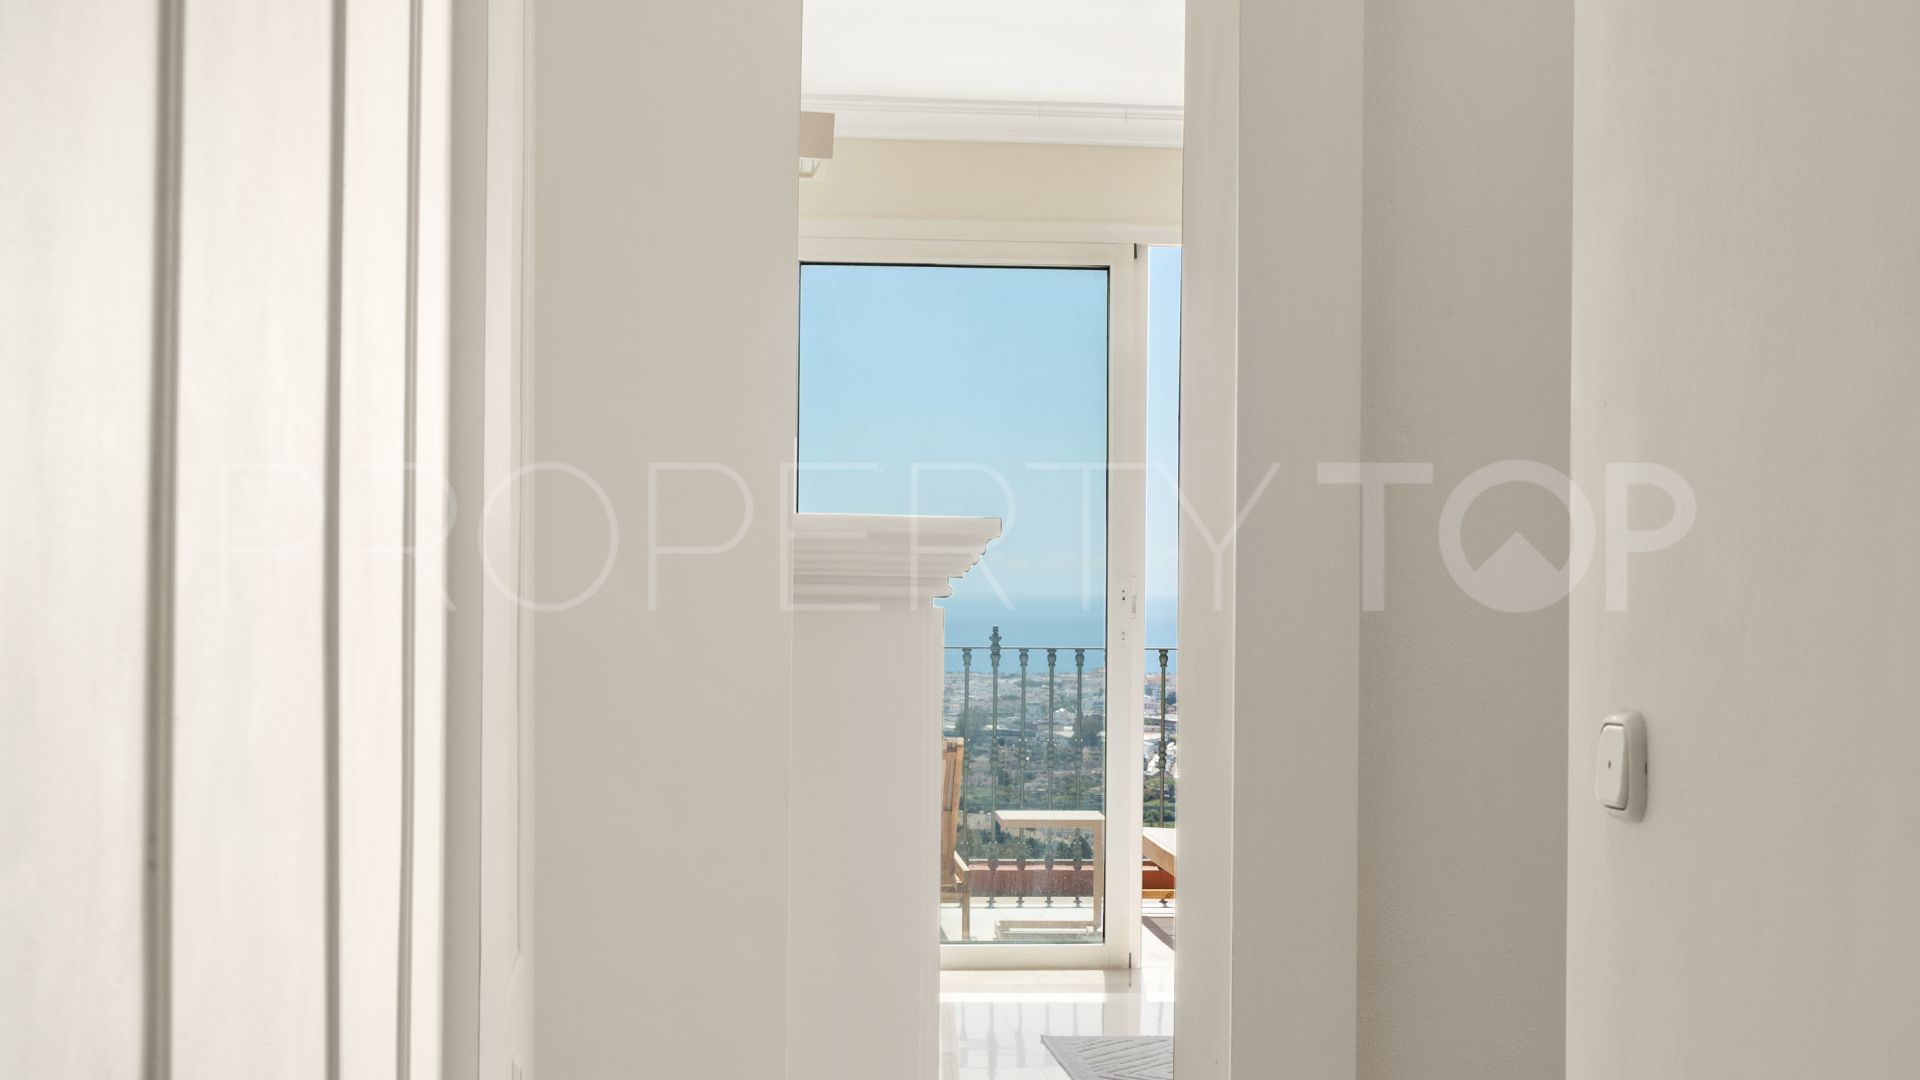 For sale apartment in Monte Halcones with 1 bedroom